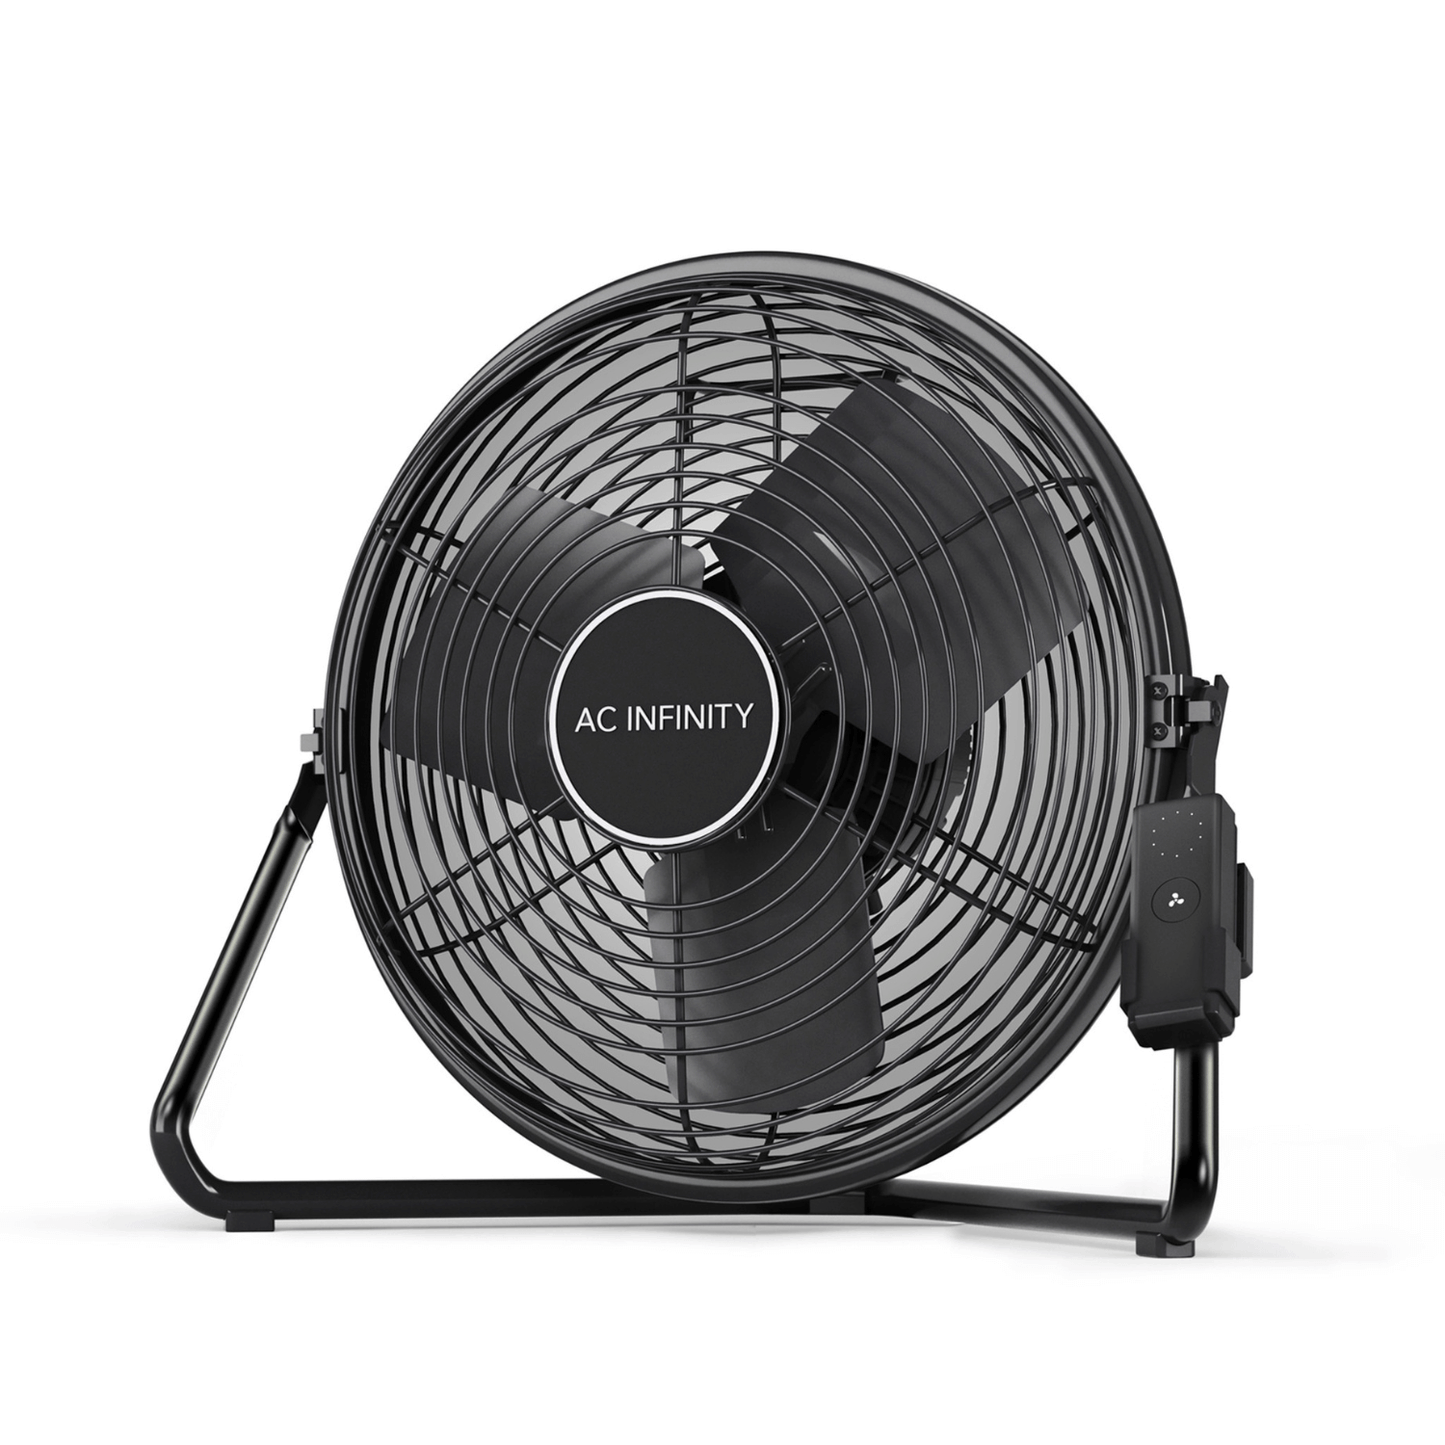 AC Infinity CLOUDLIFT S12, Floor Wall Fan with Wireless Controller, 12-Inch AC-WFS12 Ventilation